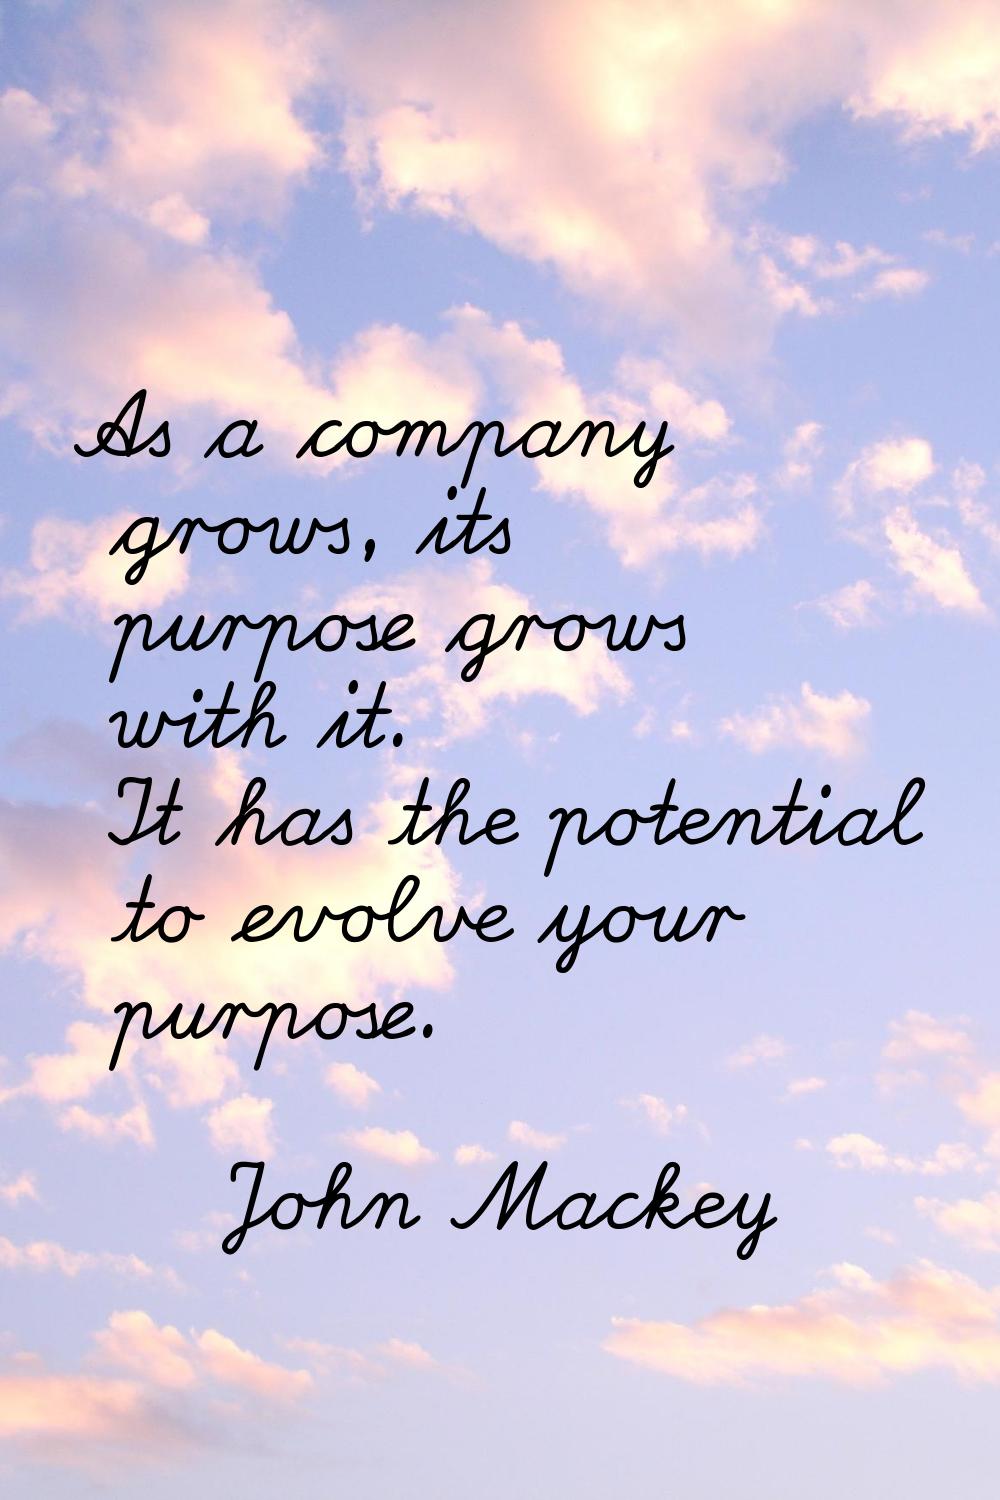 As a company grows, its purpose grows with it. It has the potential to evolve your purpose.